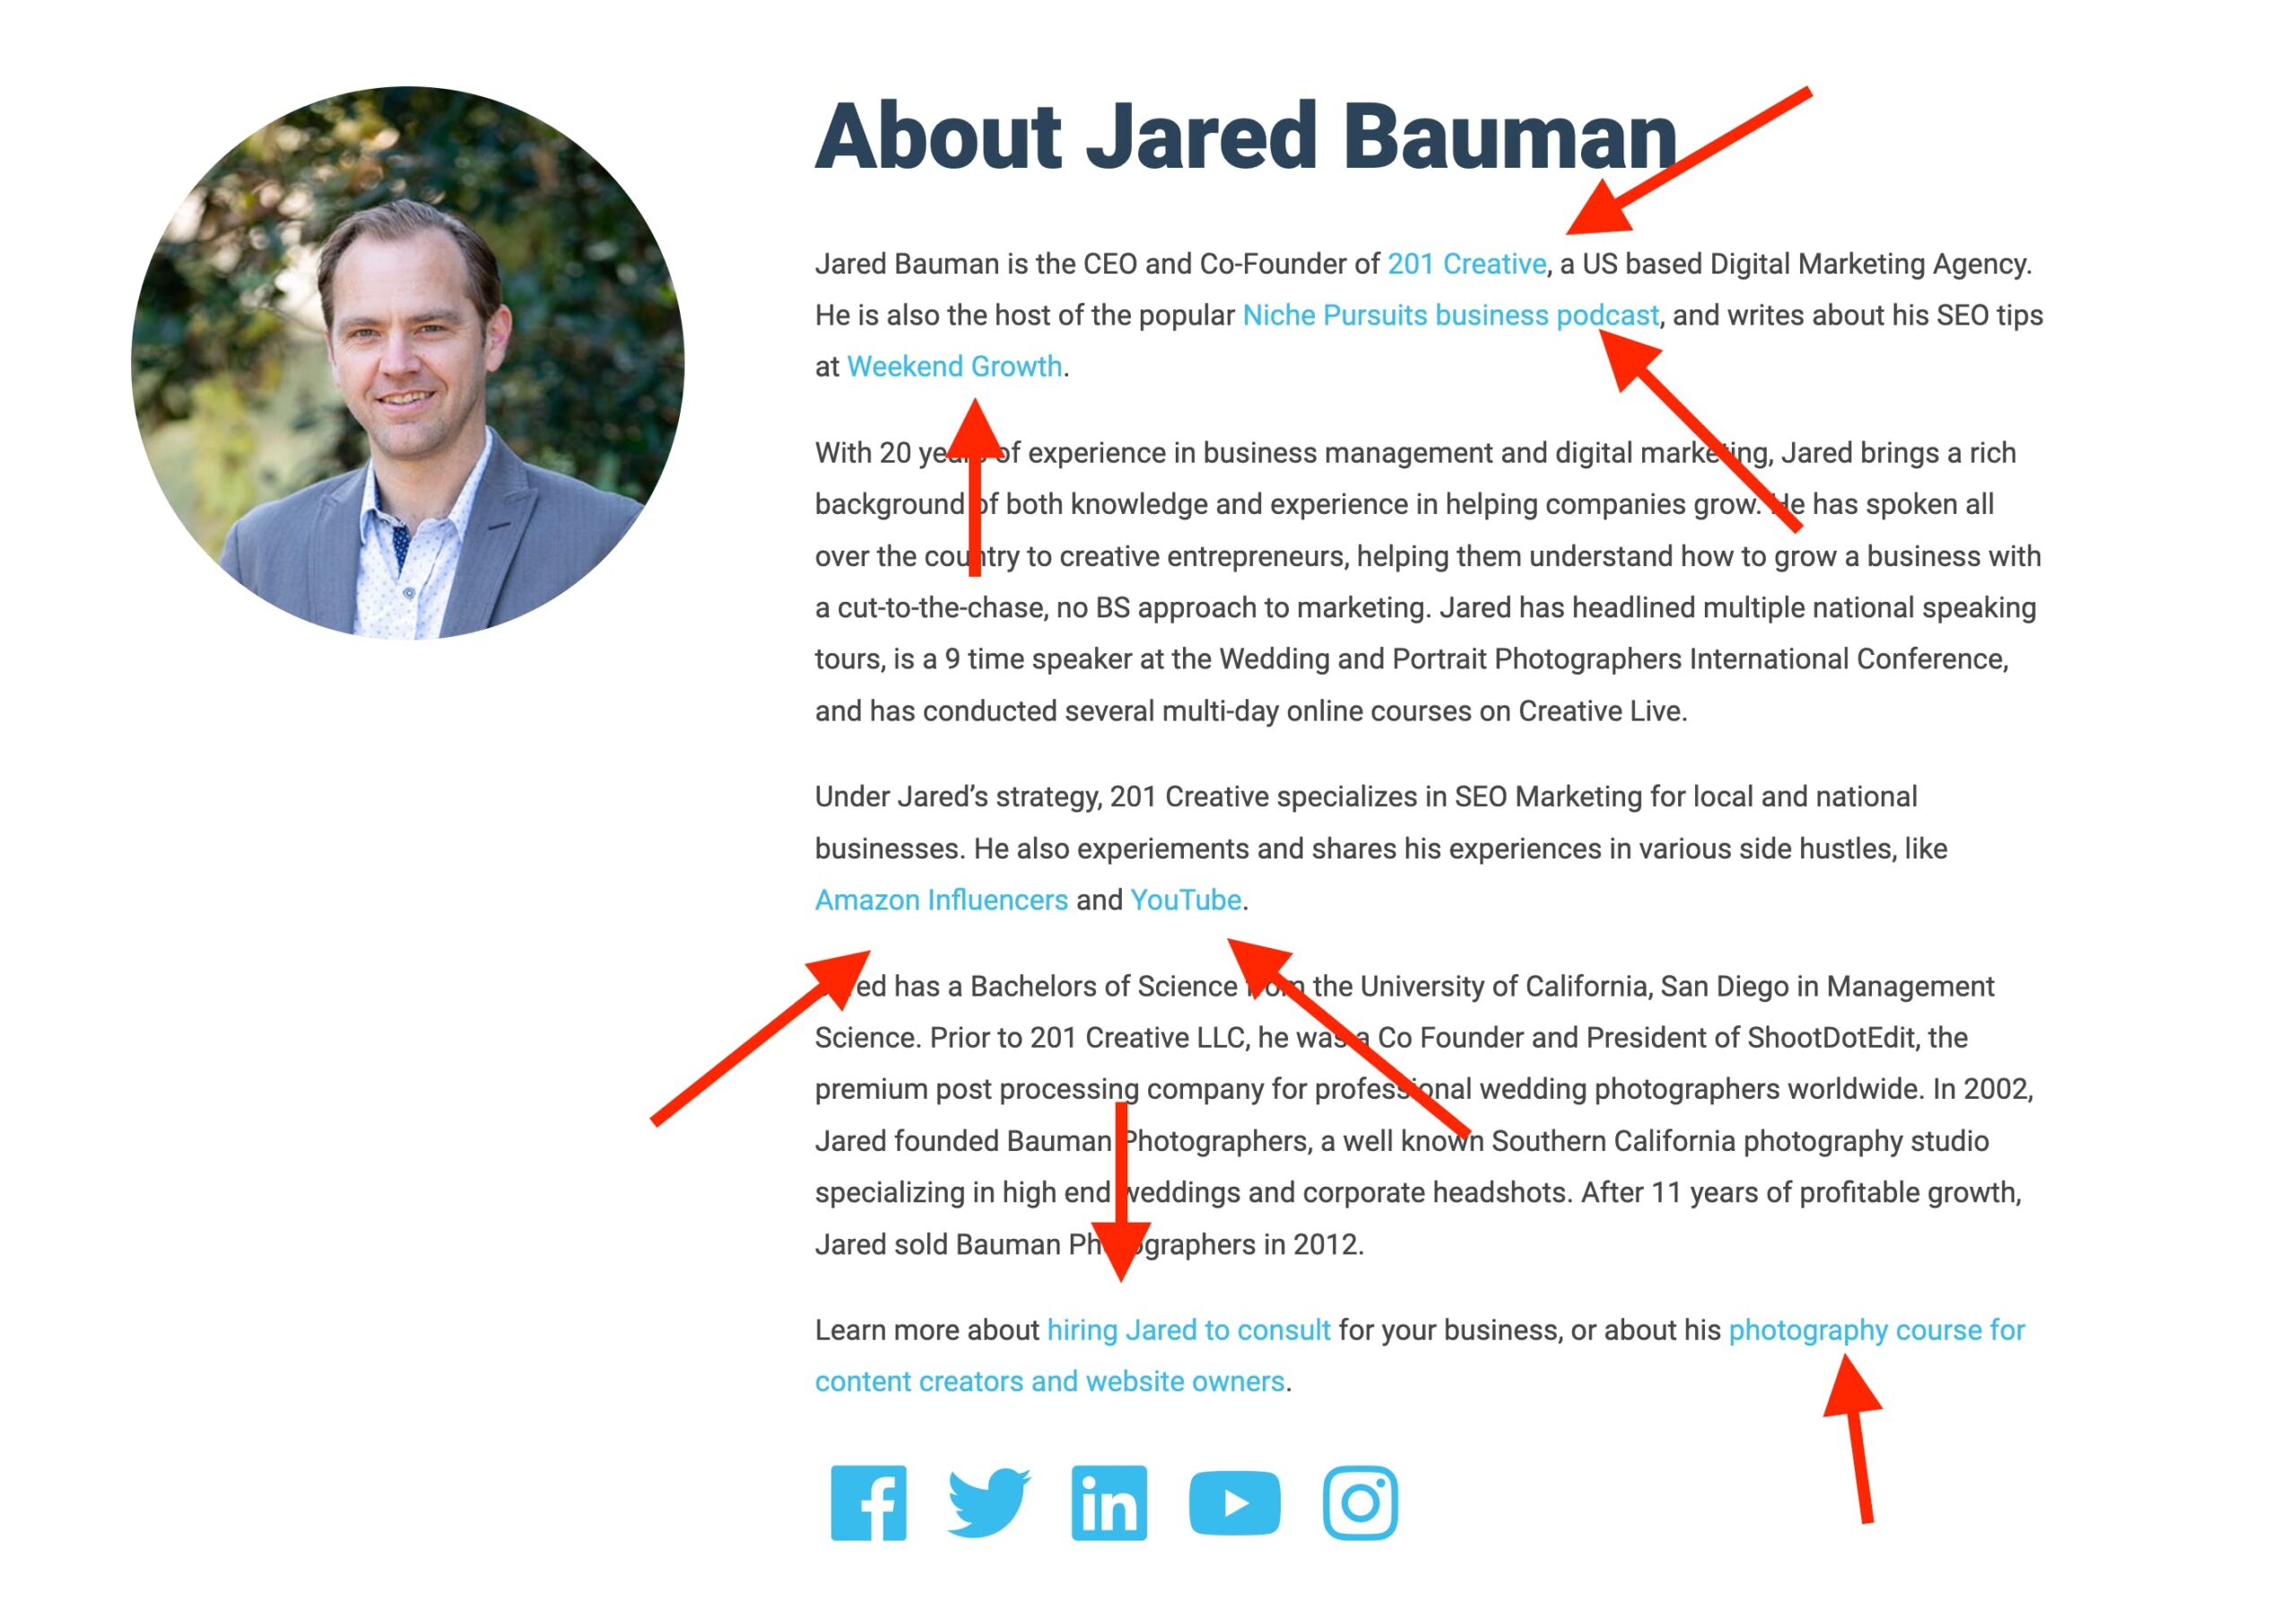 Jared Bauman's about page